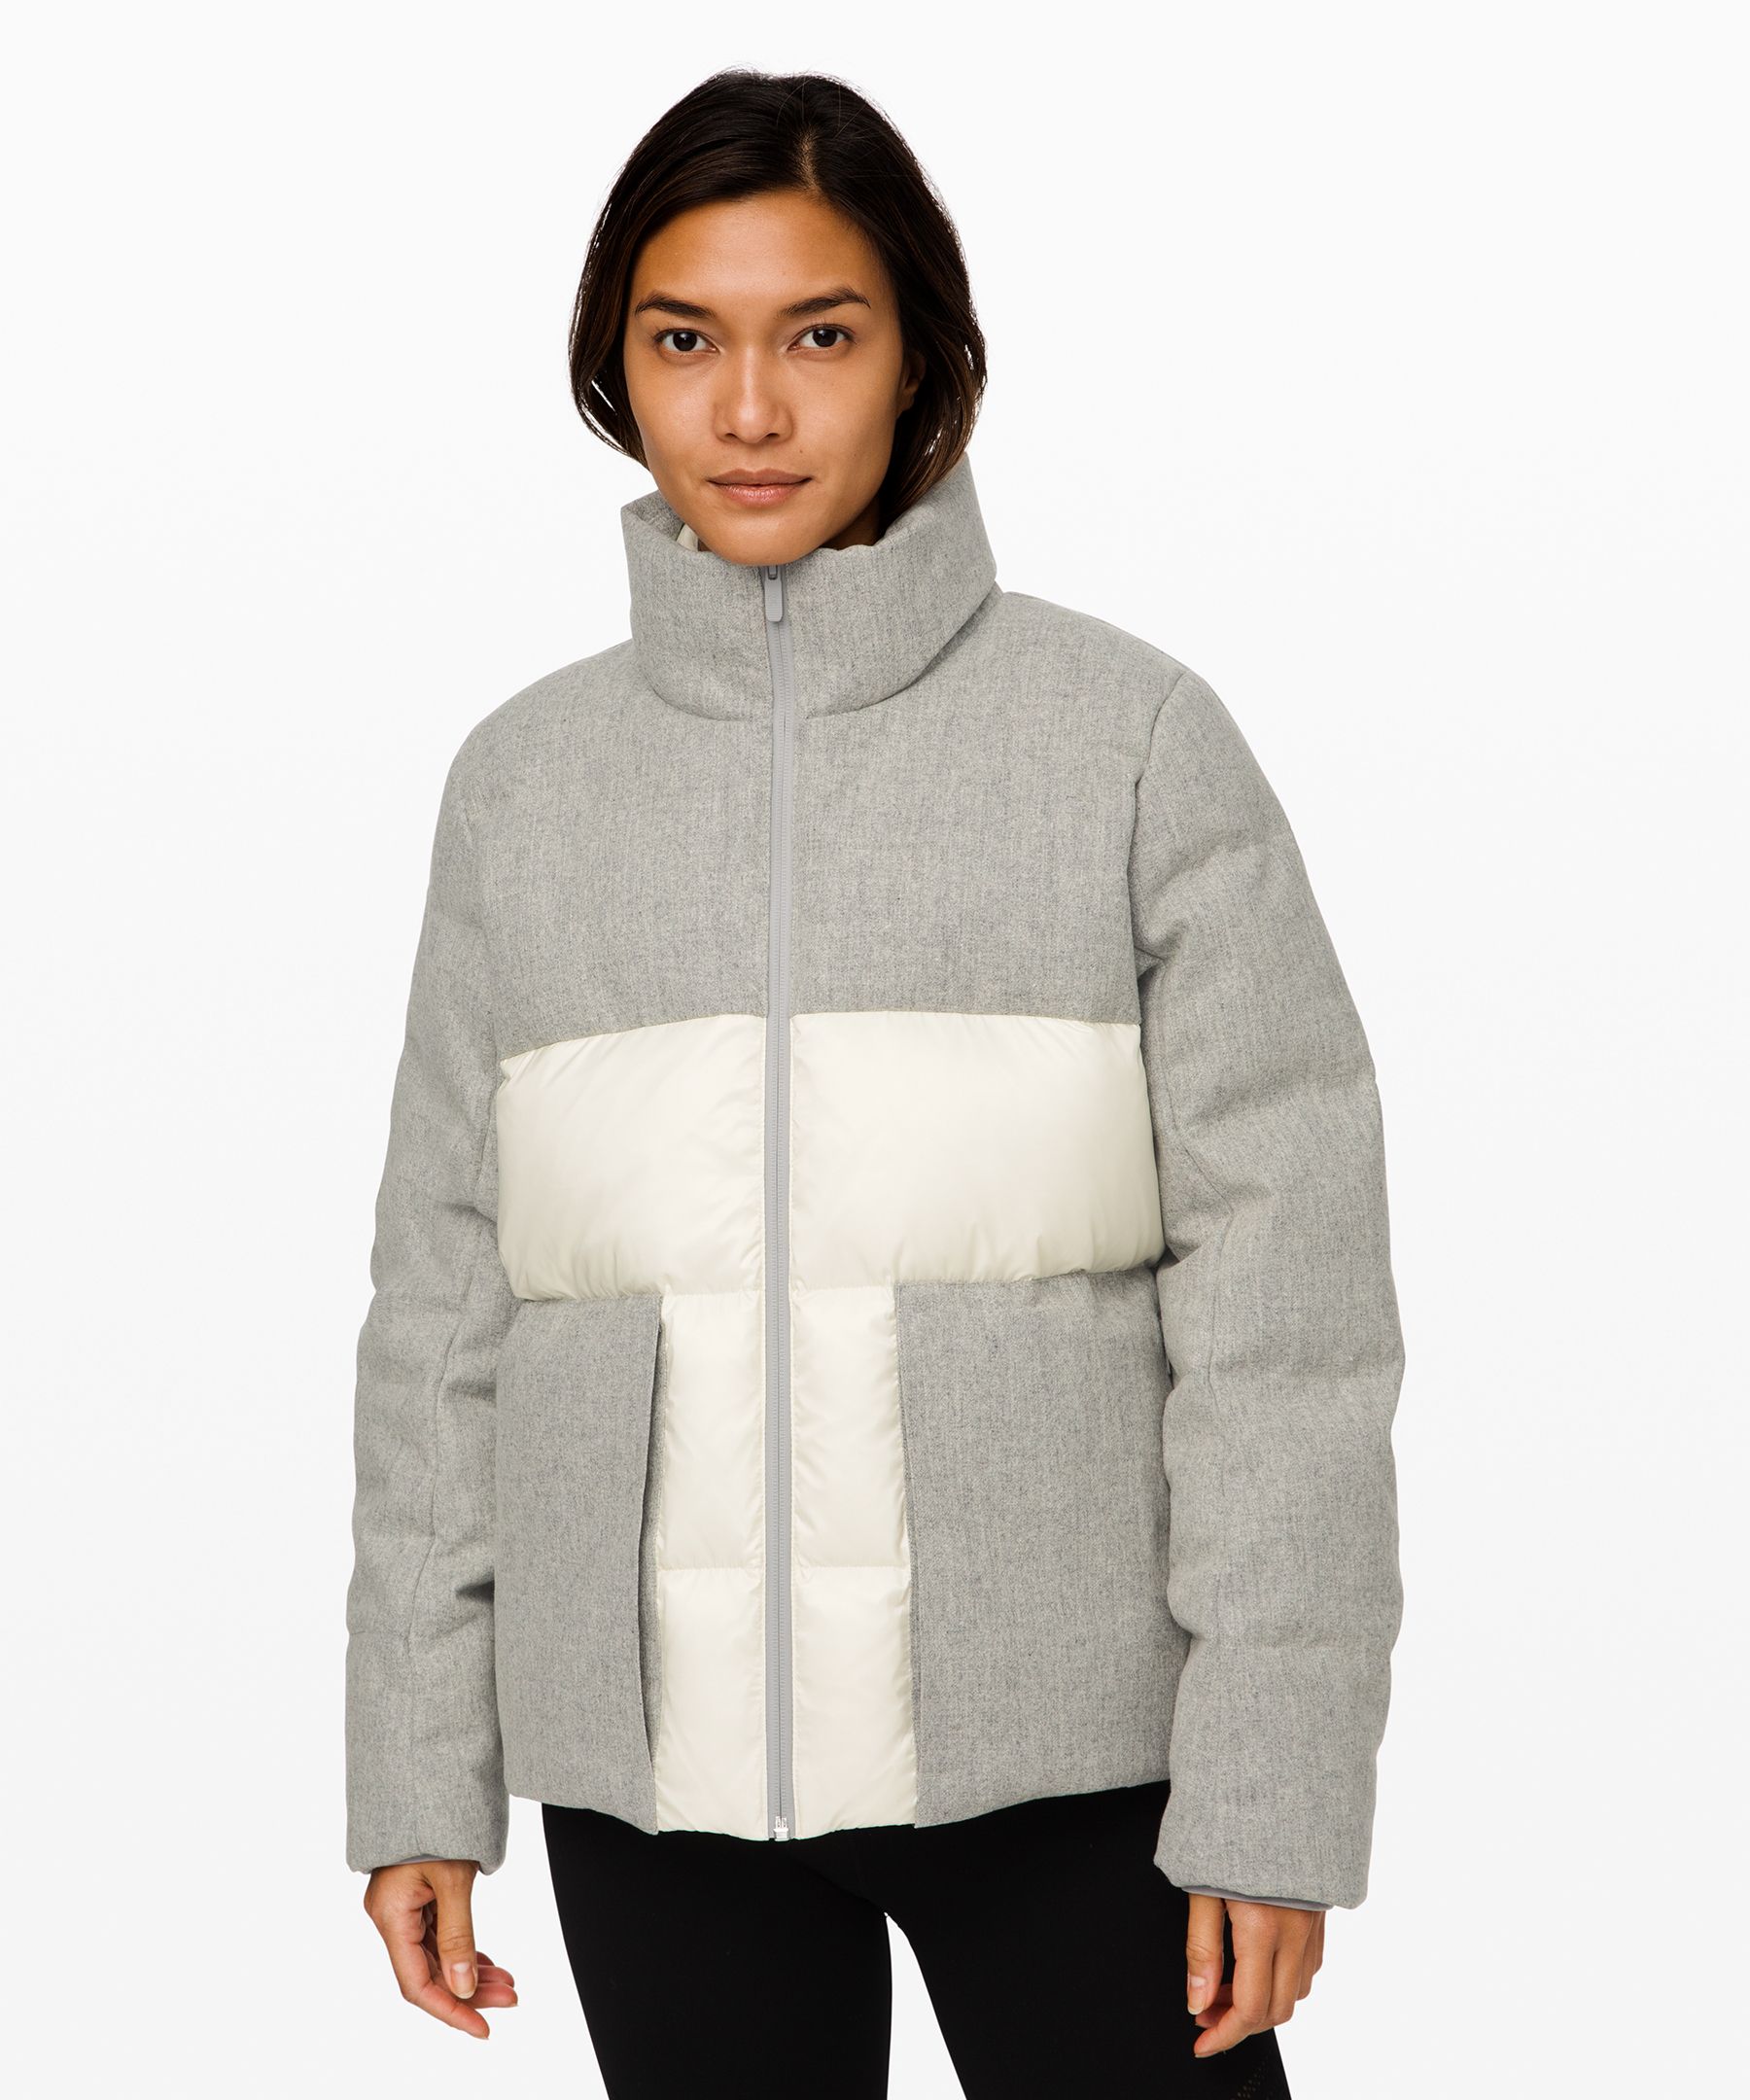 Winter Chill Wool Jacket | We Made Too 